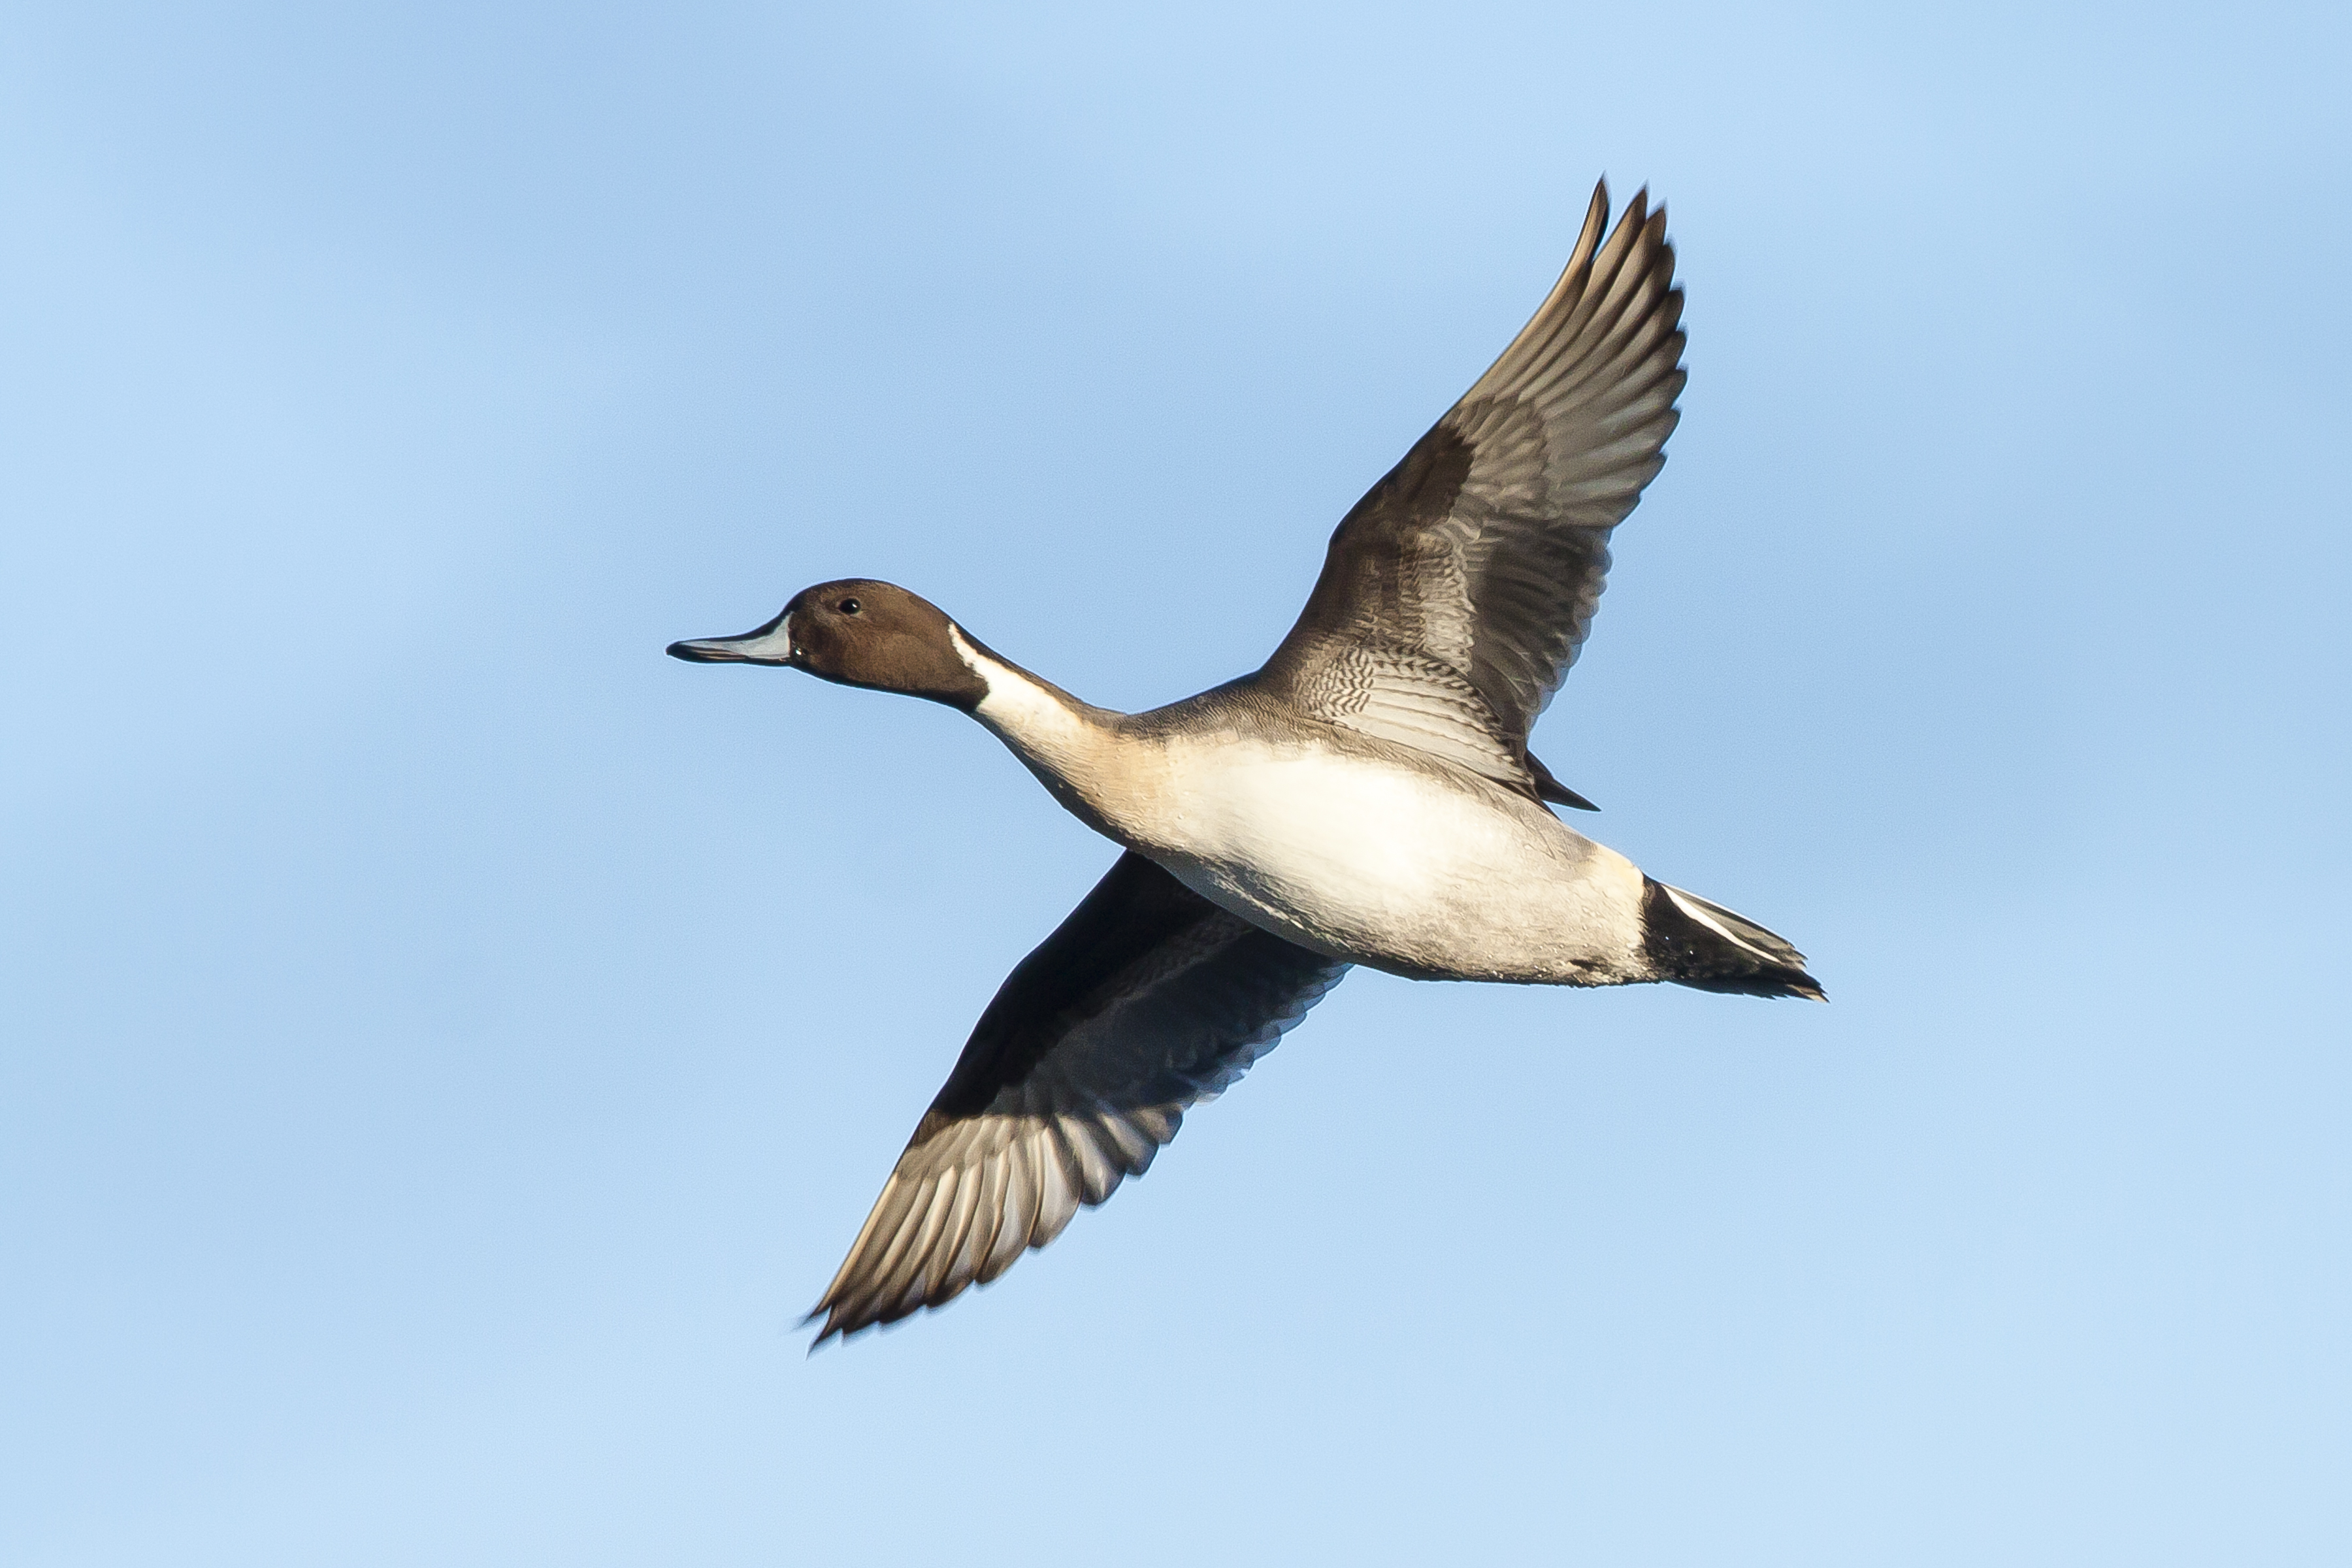 Northern pintail in flight against a blue sky